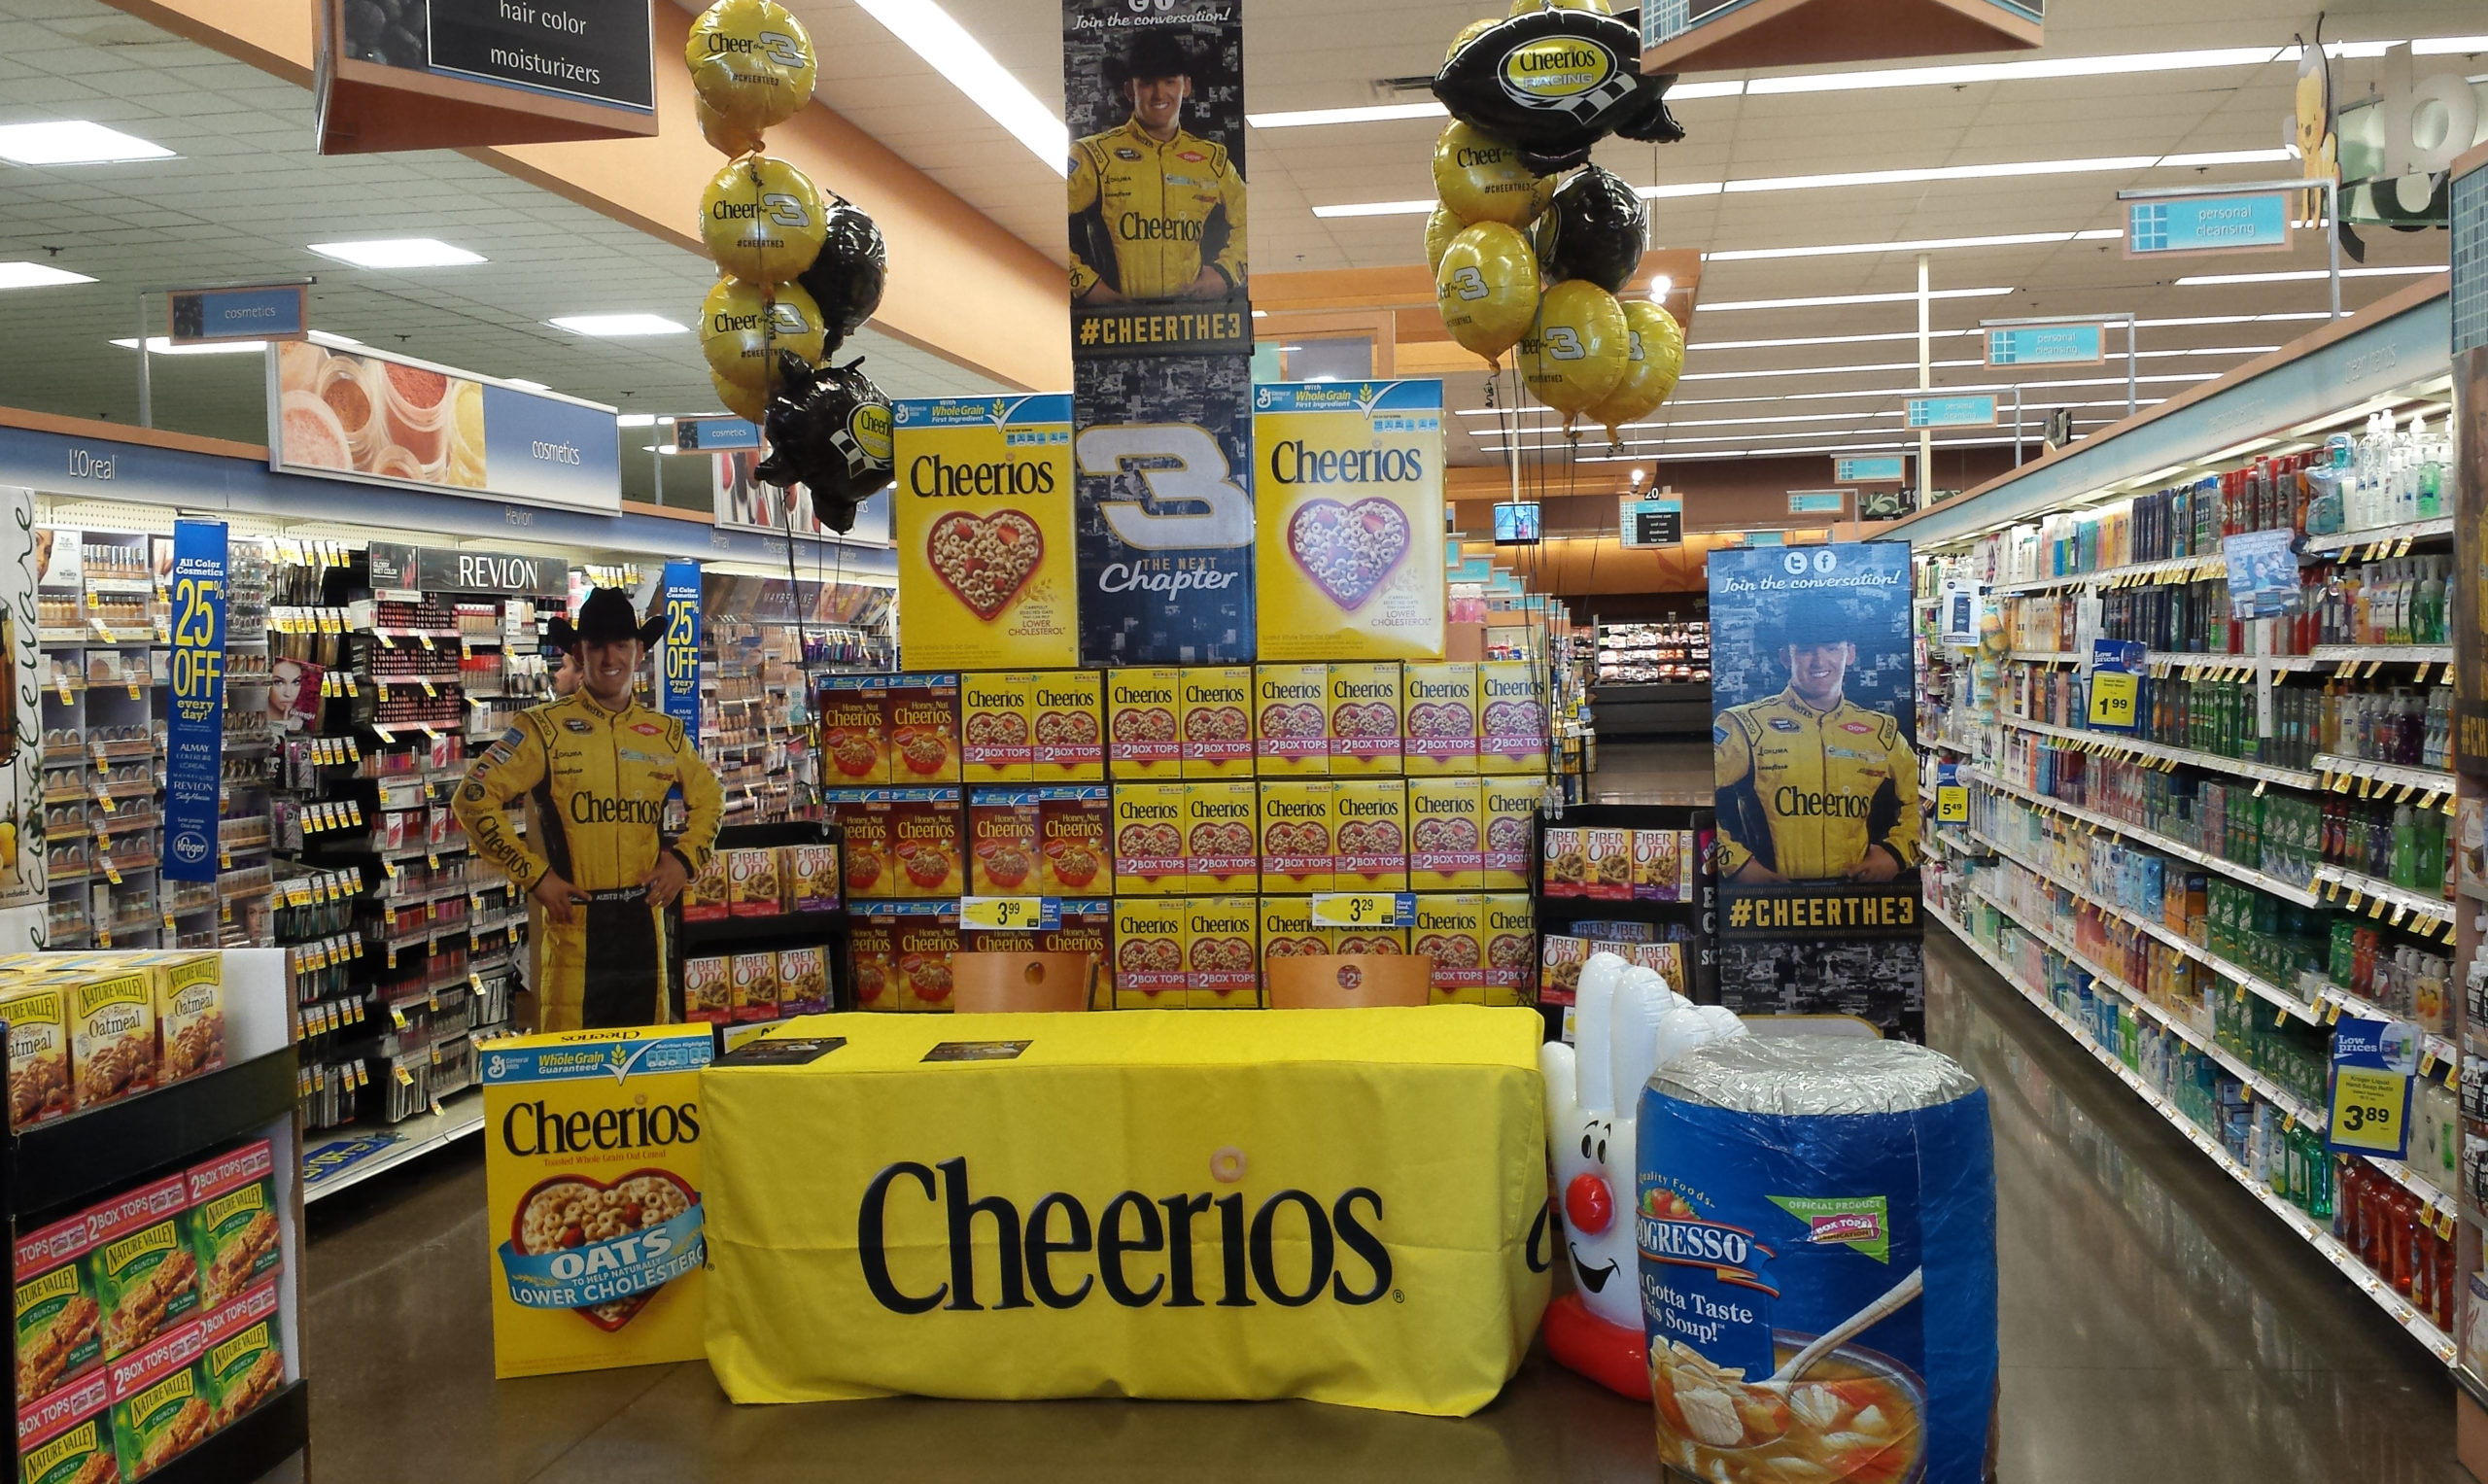 Cheerios products at General Mills Supermarket Sweep